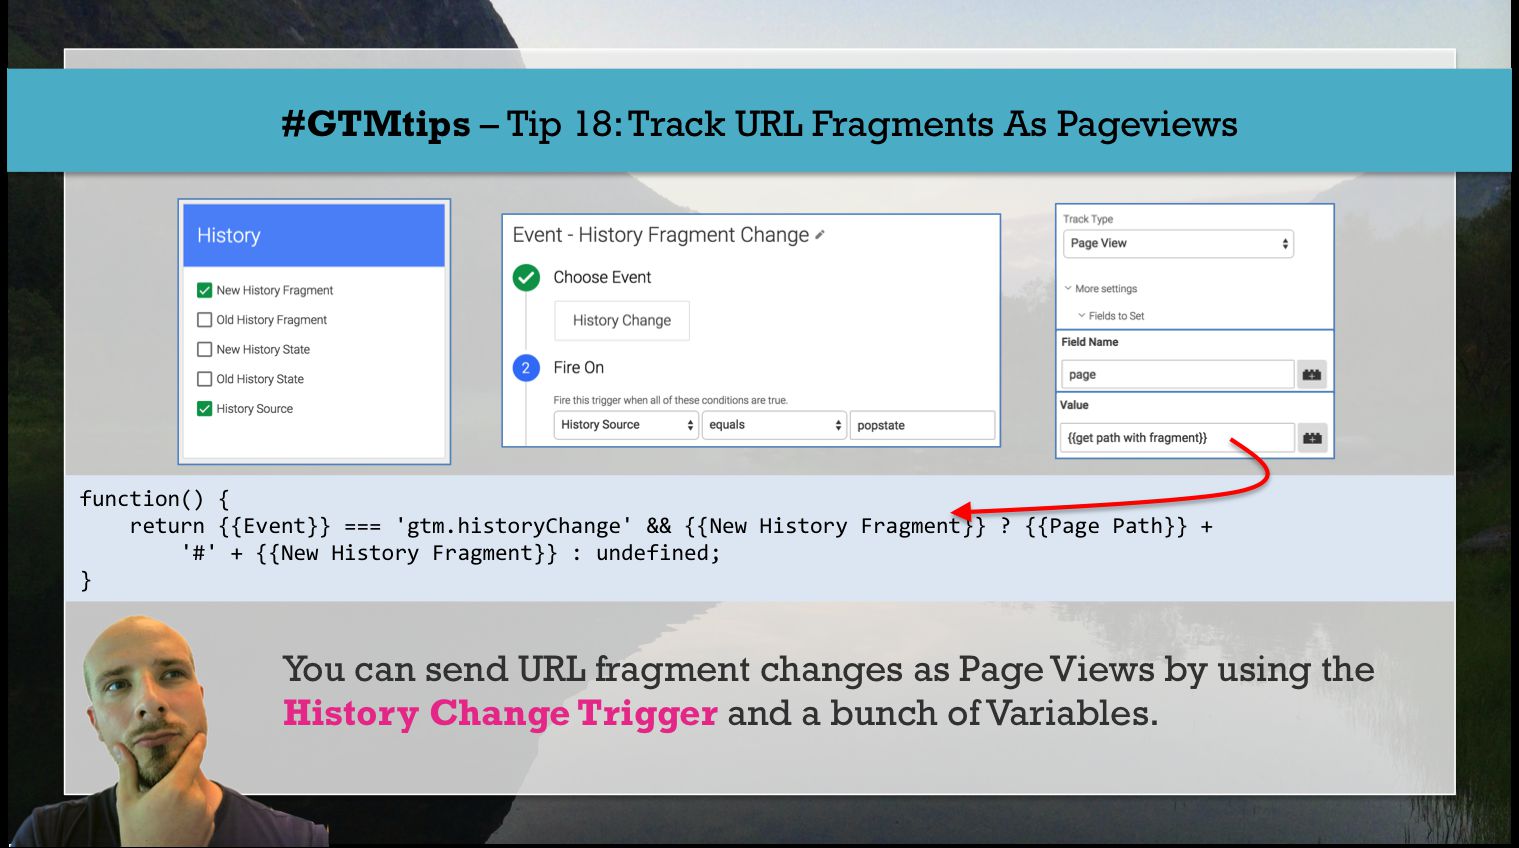 #GTMtips: Track URL Fragments As Pageviews